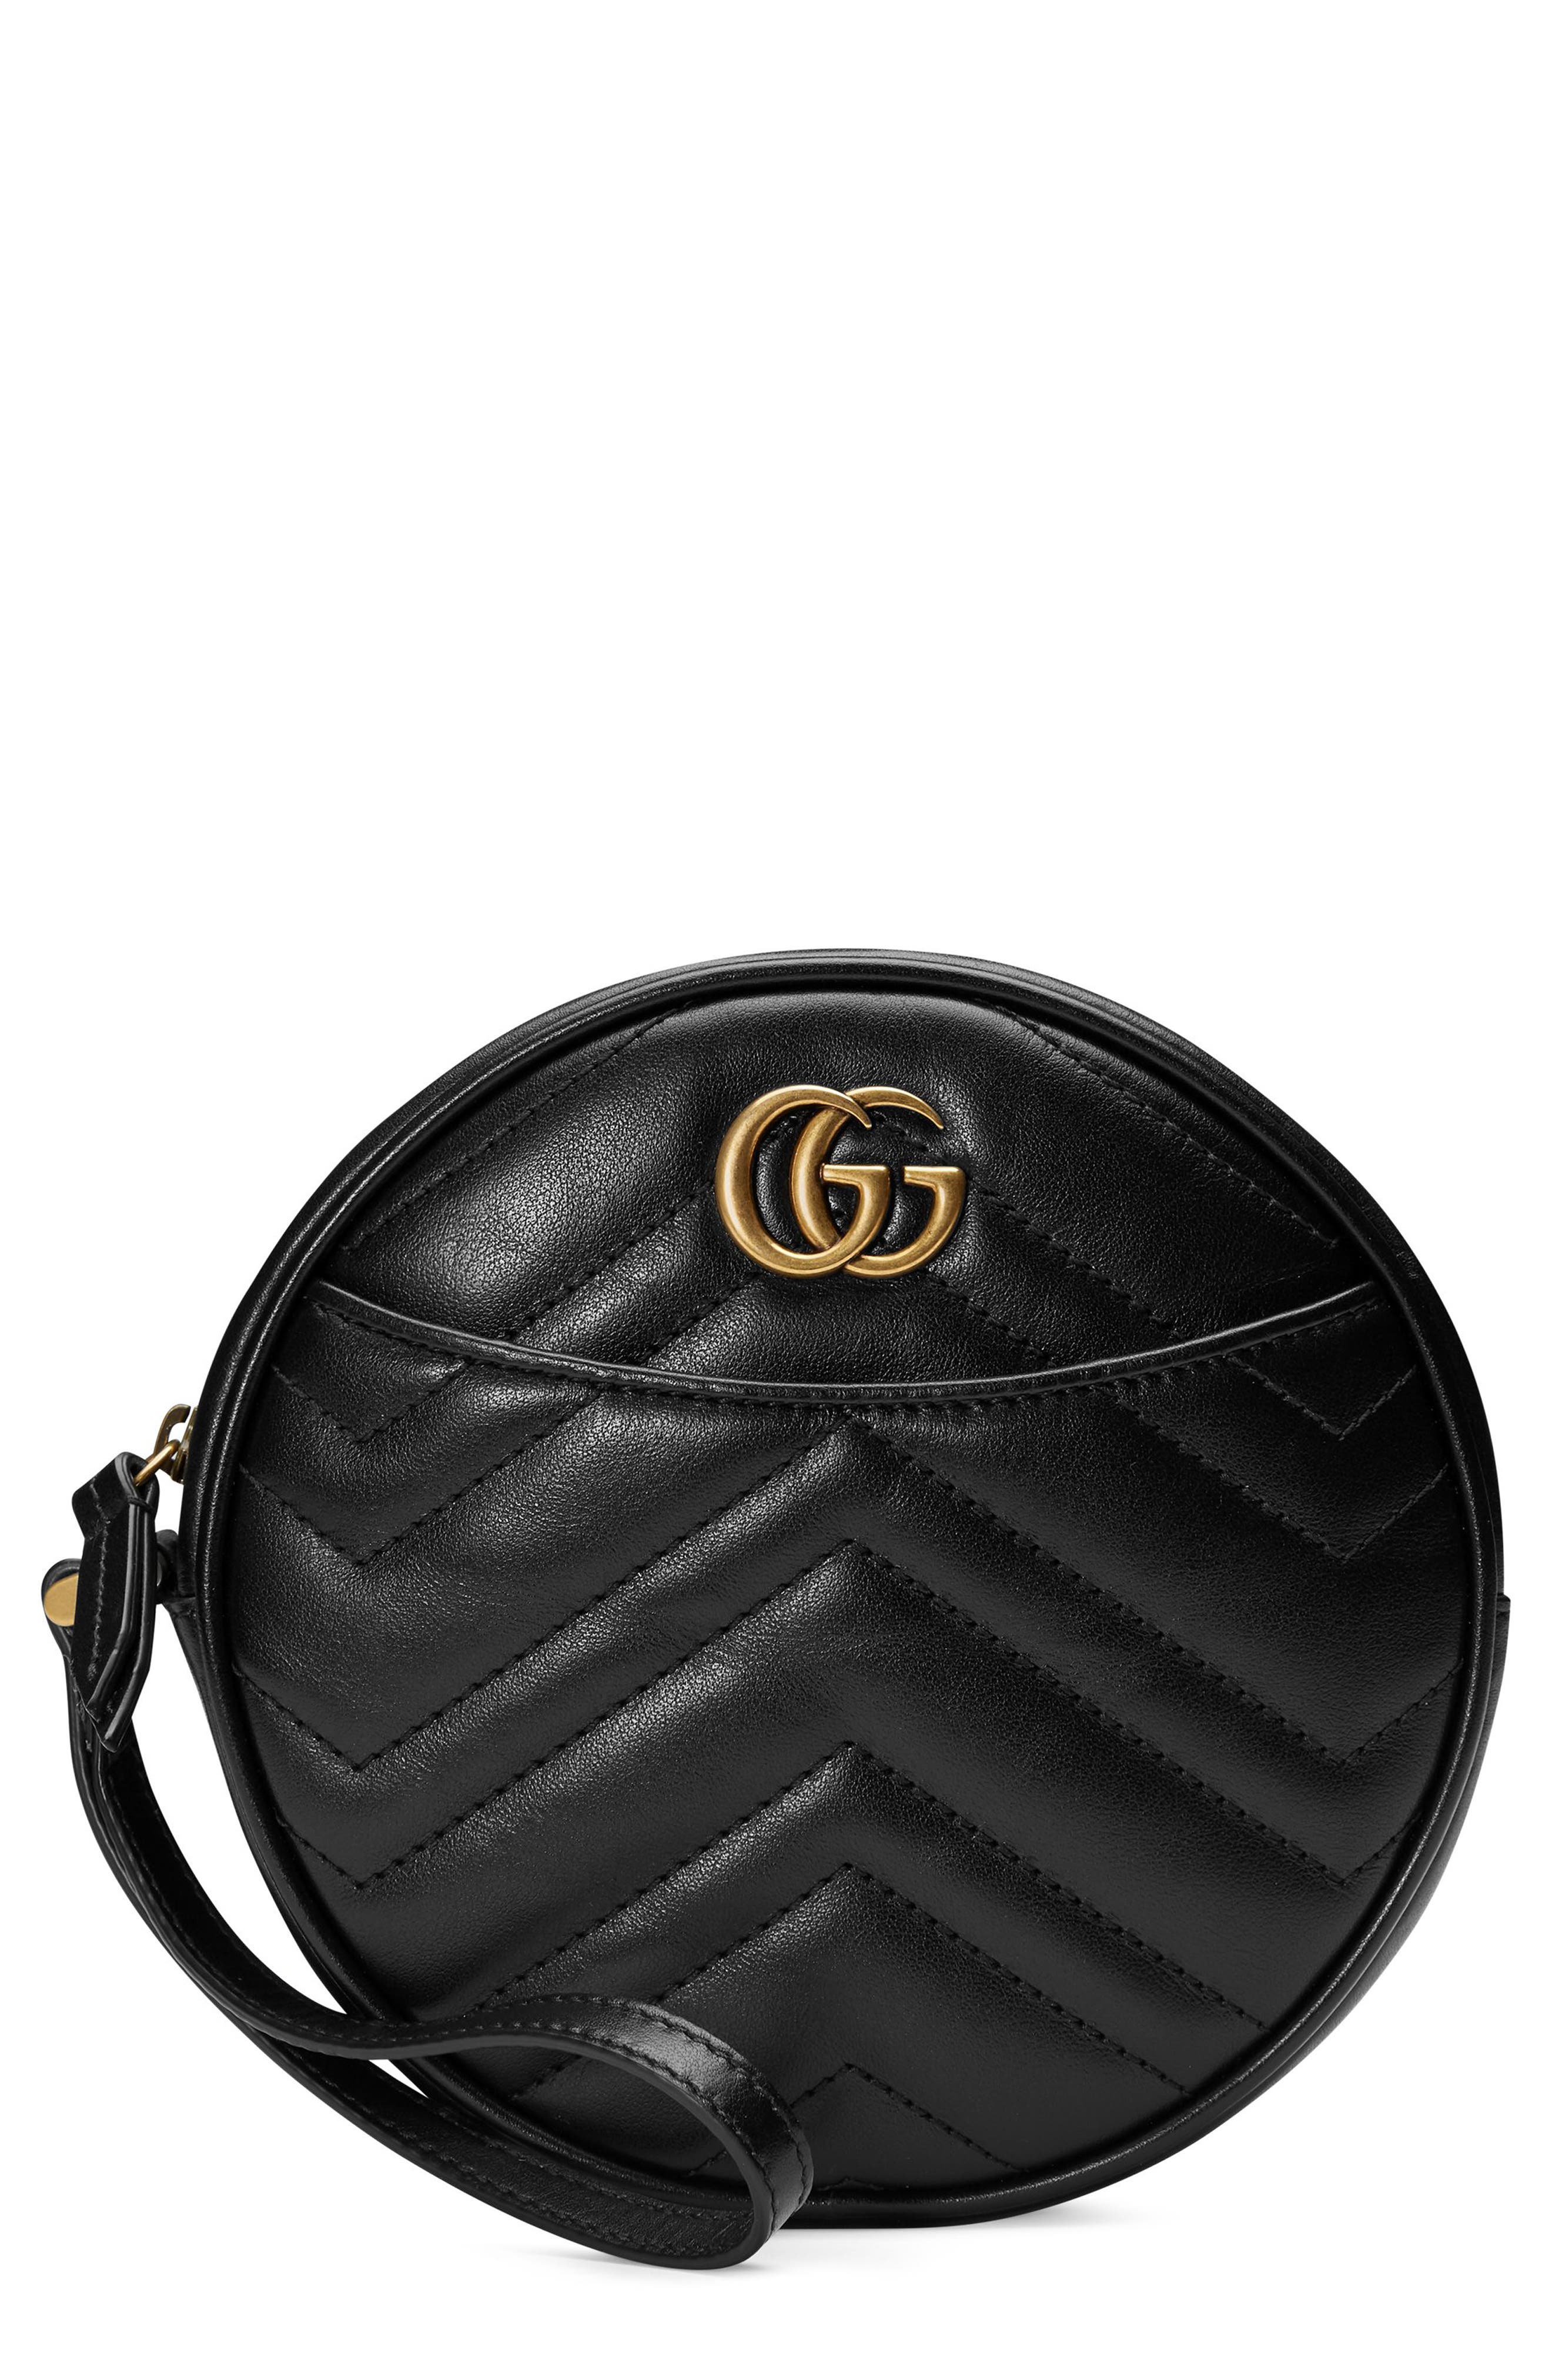 gucci clutches on sale